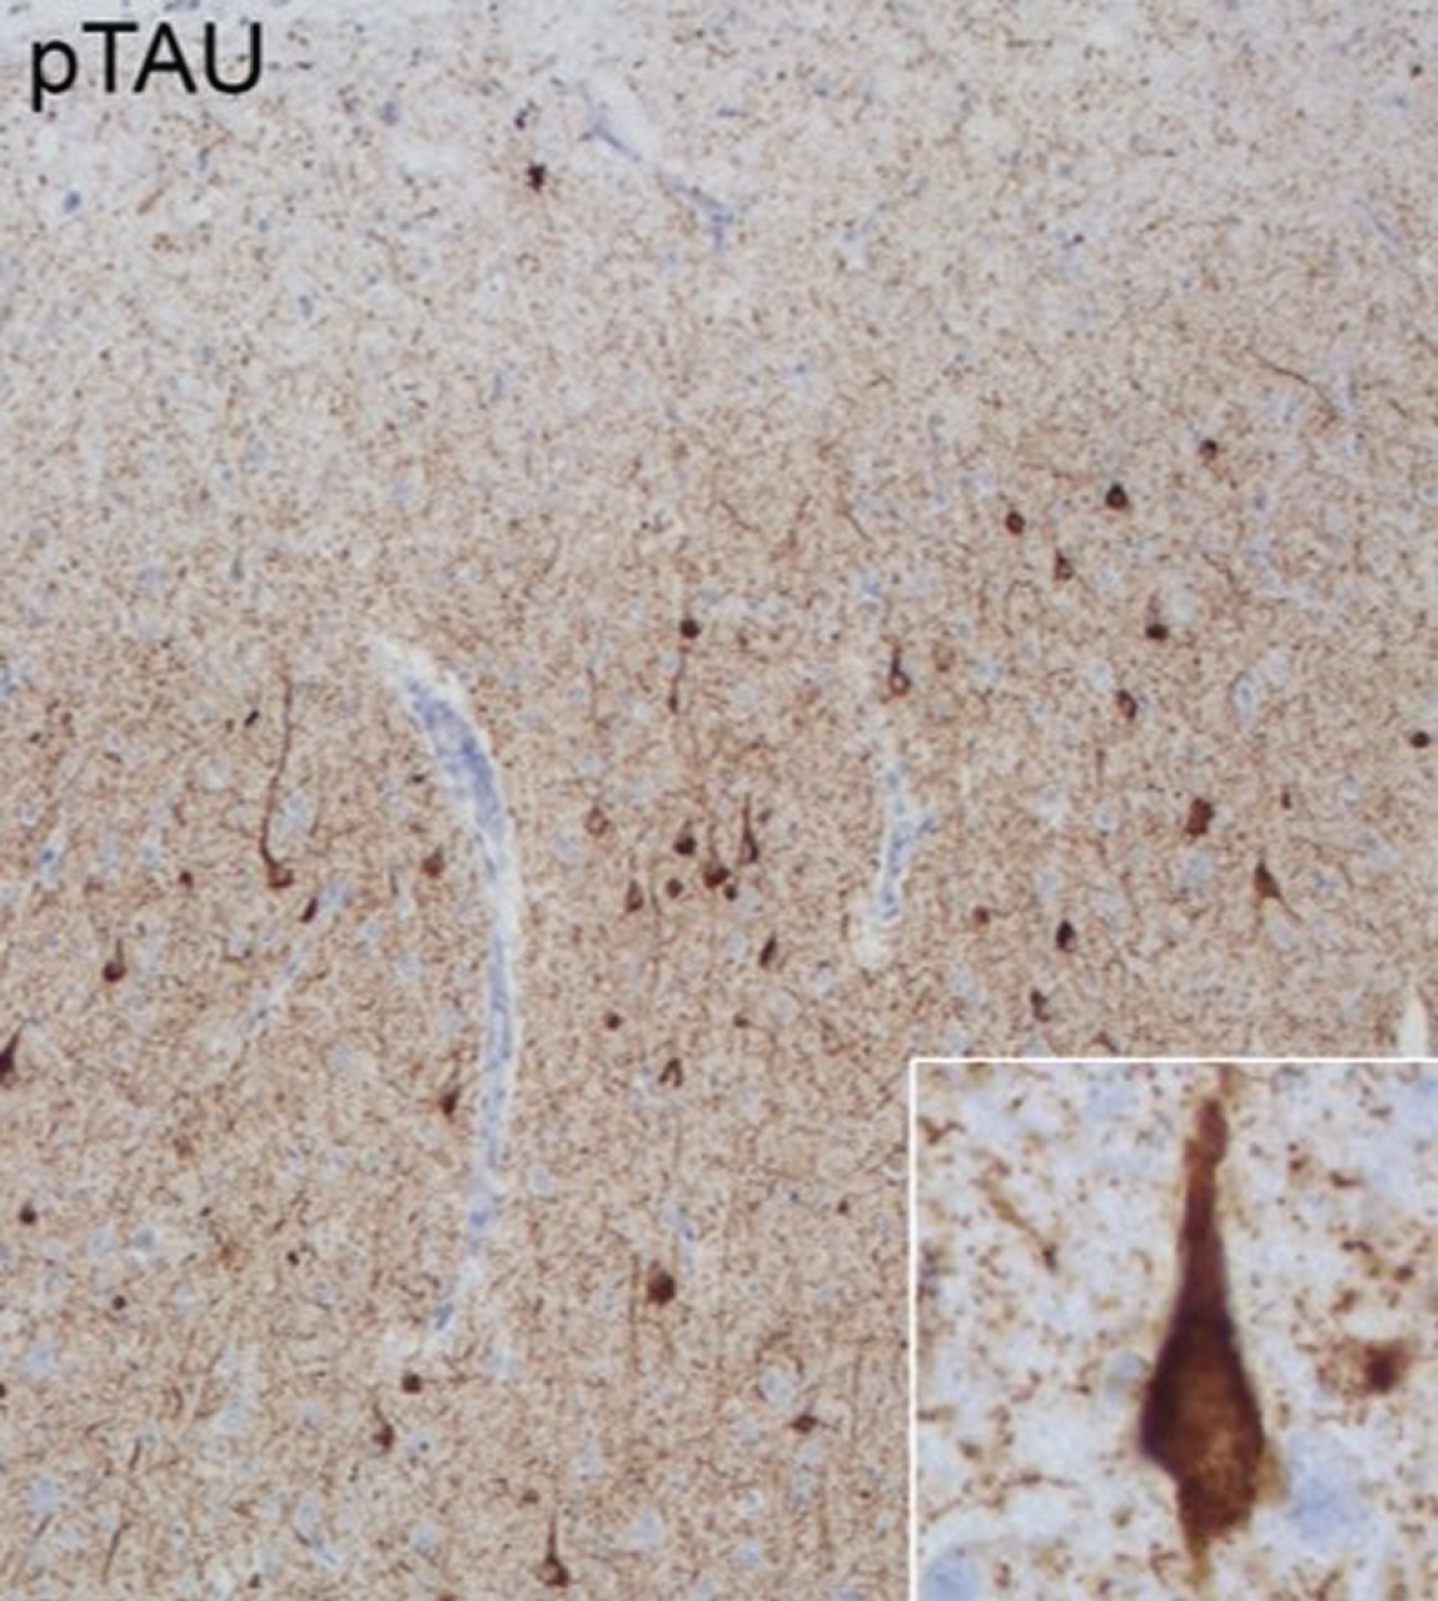 Pathological features of Case 3. Anterior cingulate cortex stained with phospho-tau (p-tau) monoclonal antibody (AT8: Pierce Biotechnology, Rockford, IL, USA). Extensive 3R and 4R tauopathy which is characteristic for MAPT related frontotemporal lobar degeneration is observed in neurons across all layers.